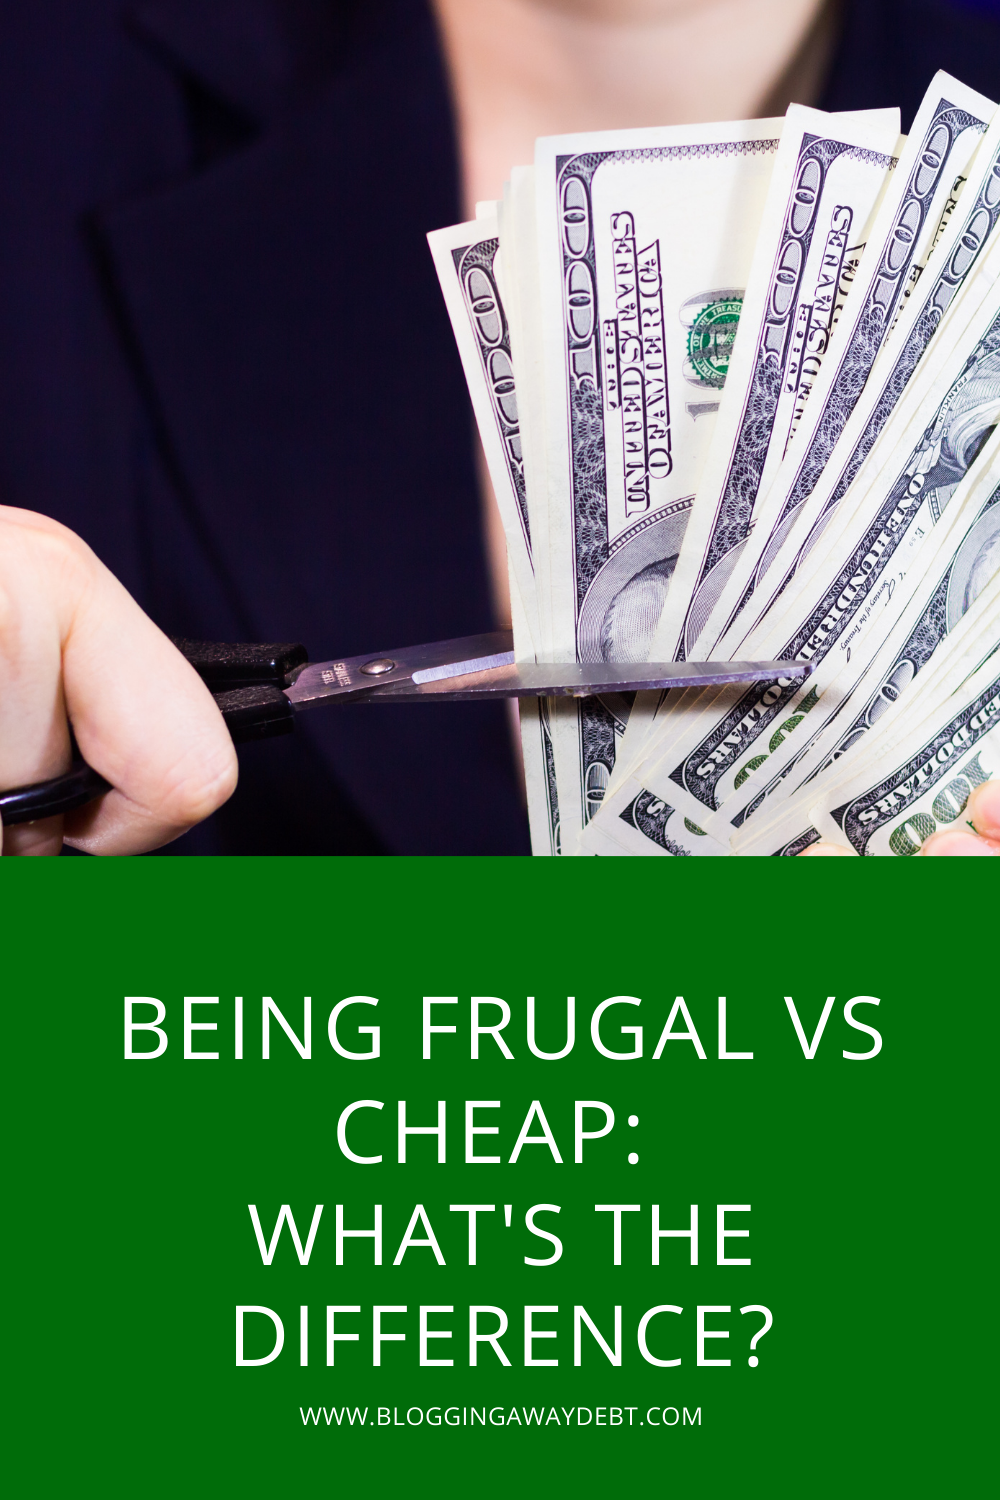 Being Frugal vs Cheap What's the Difference